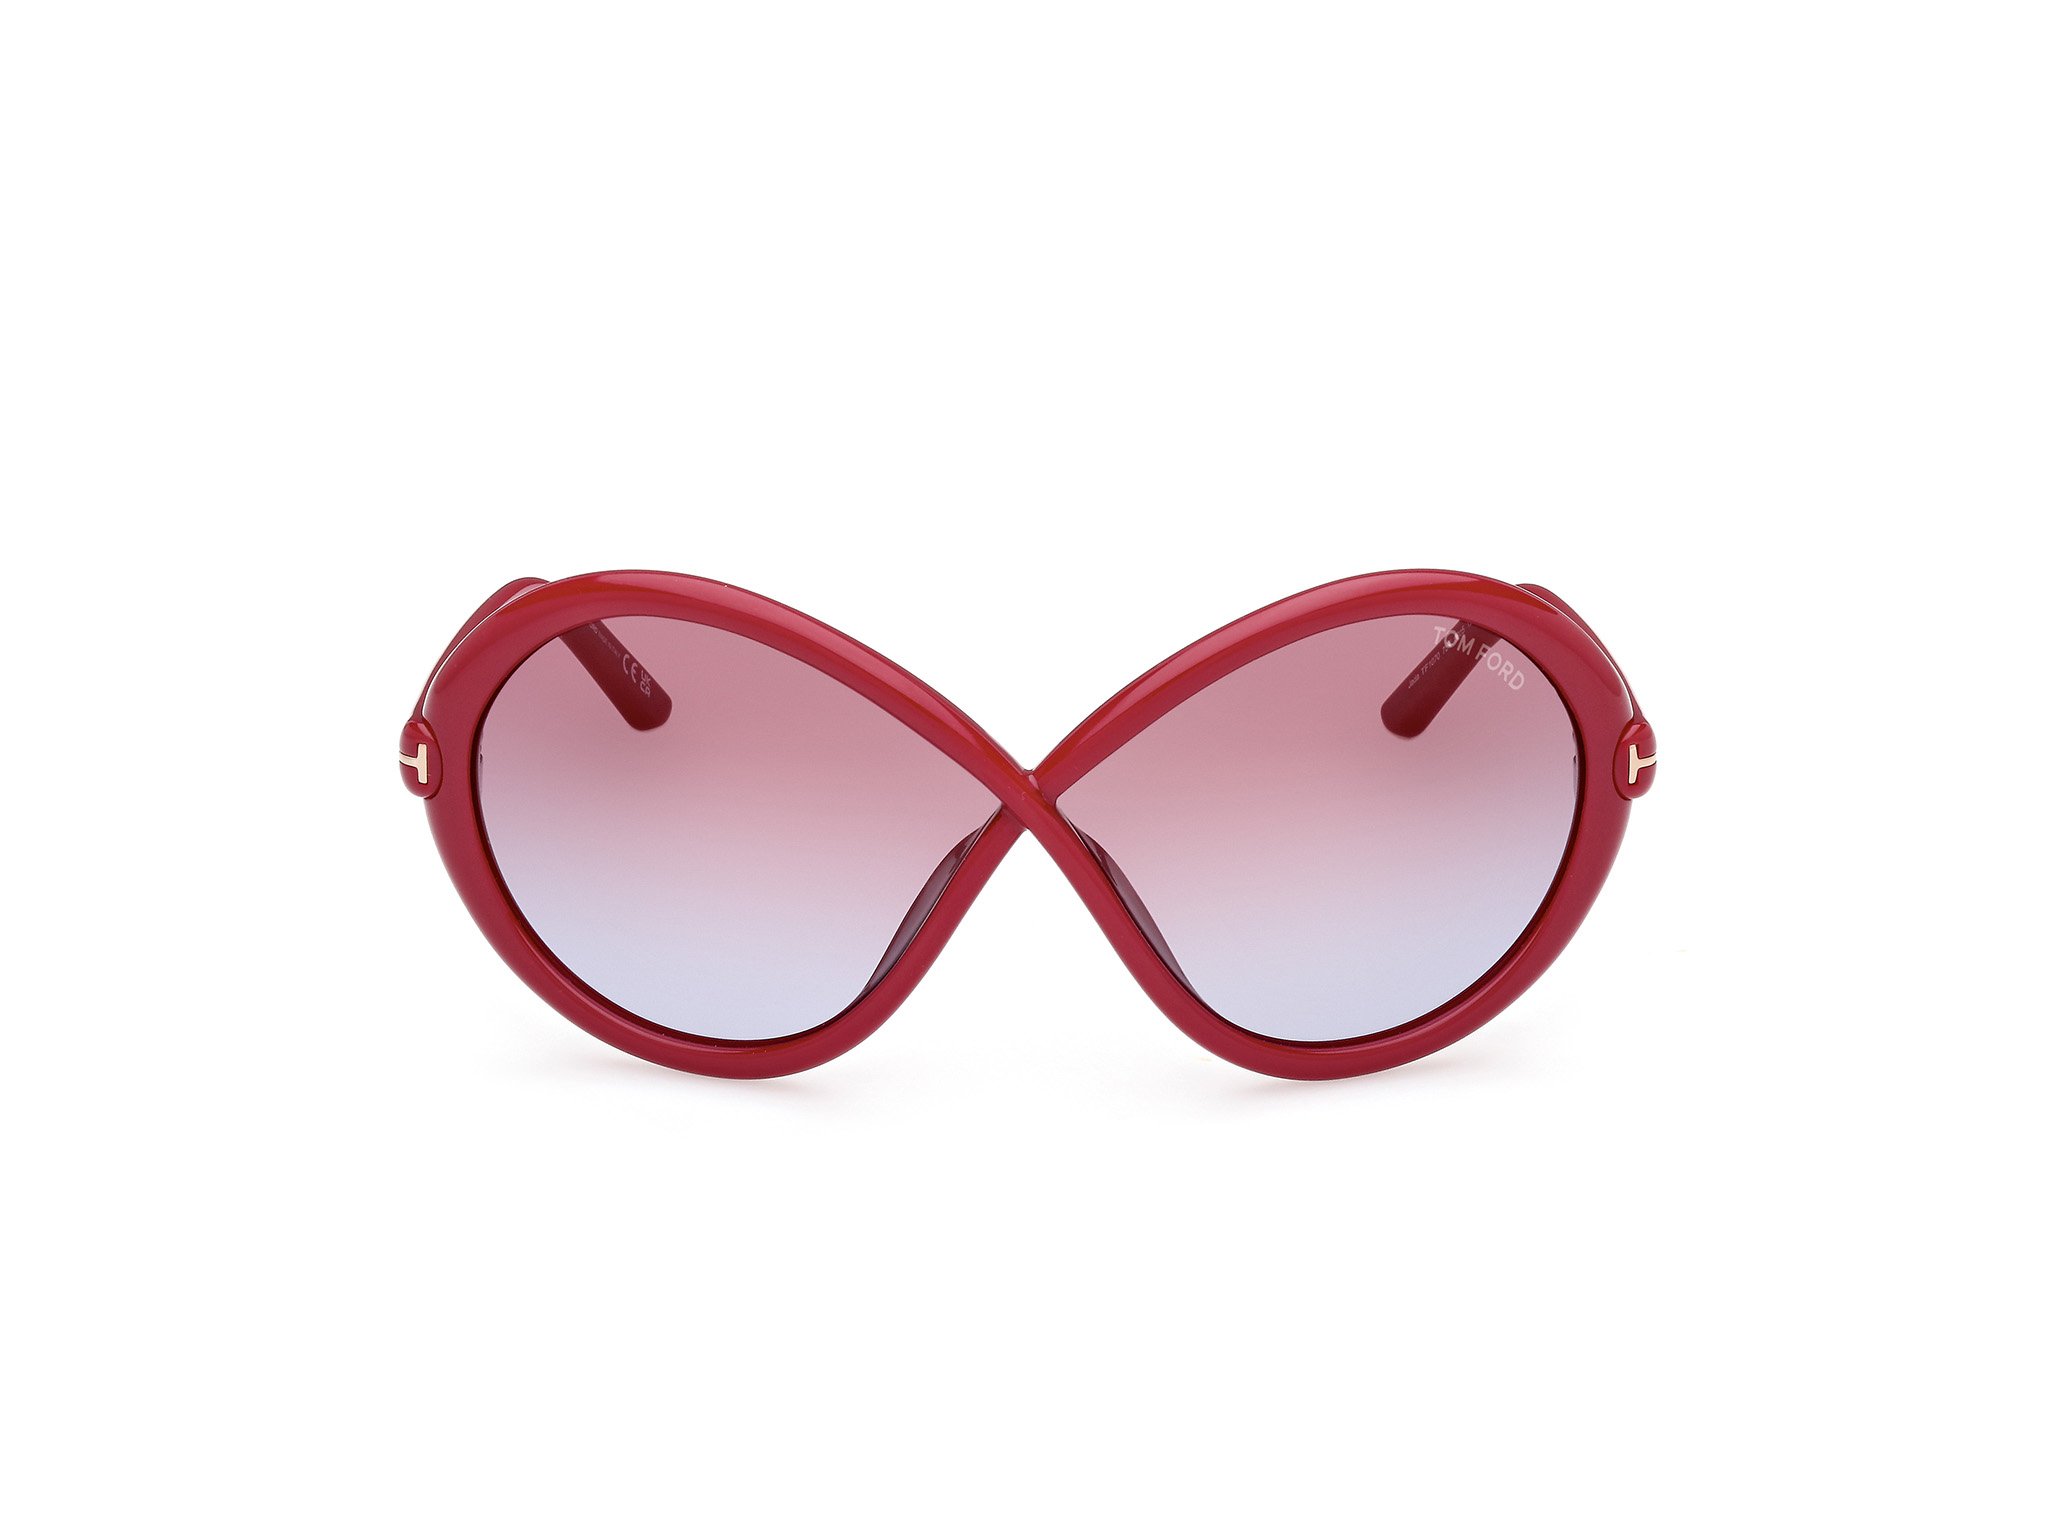  Tom Ford Sonnenbrille Jada in fuxia FT1070 75Y